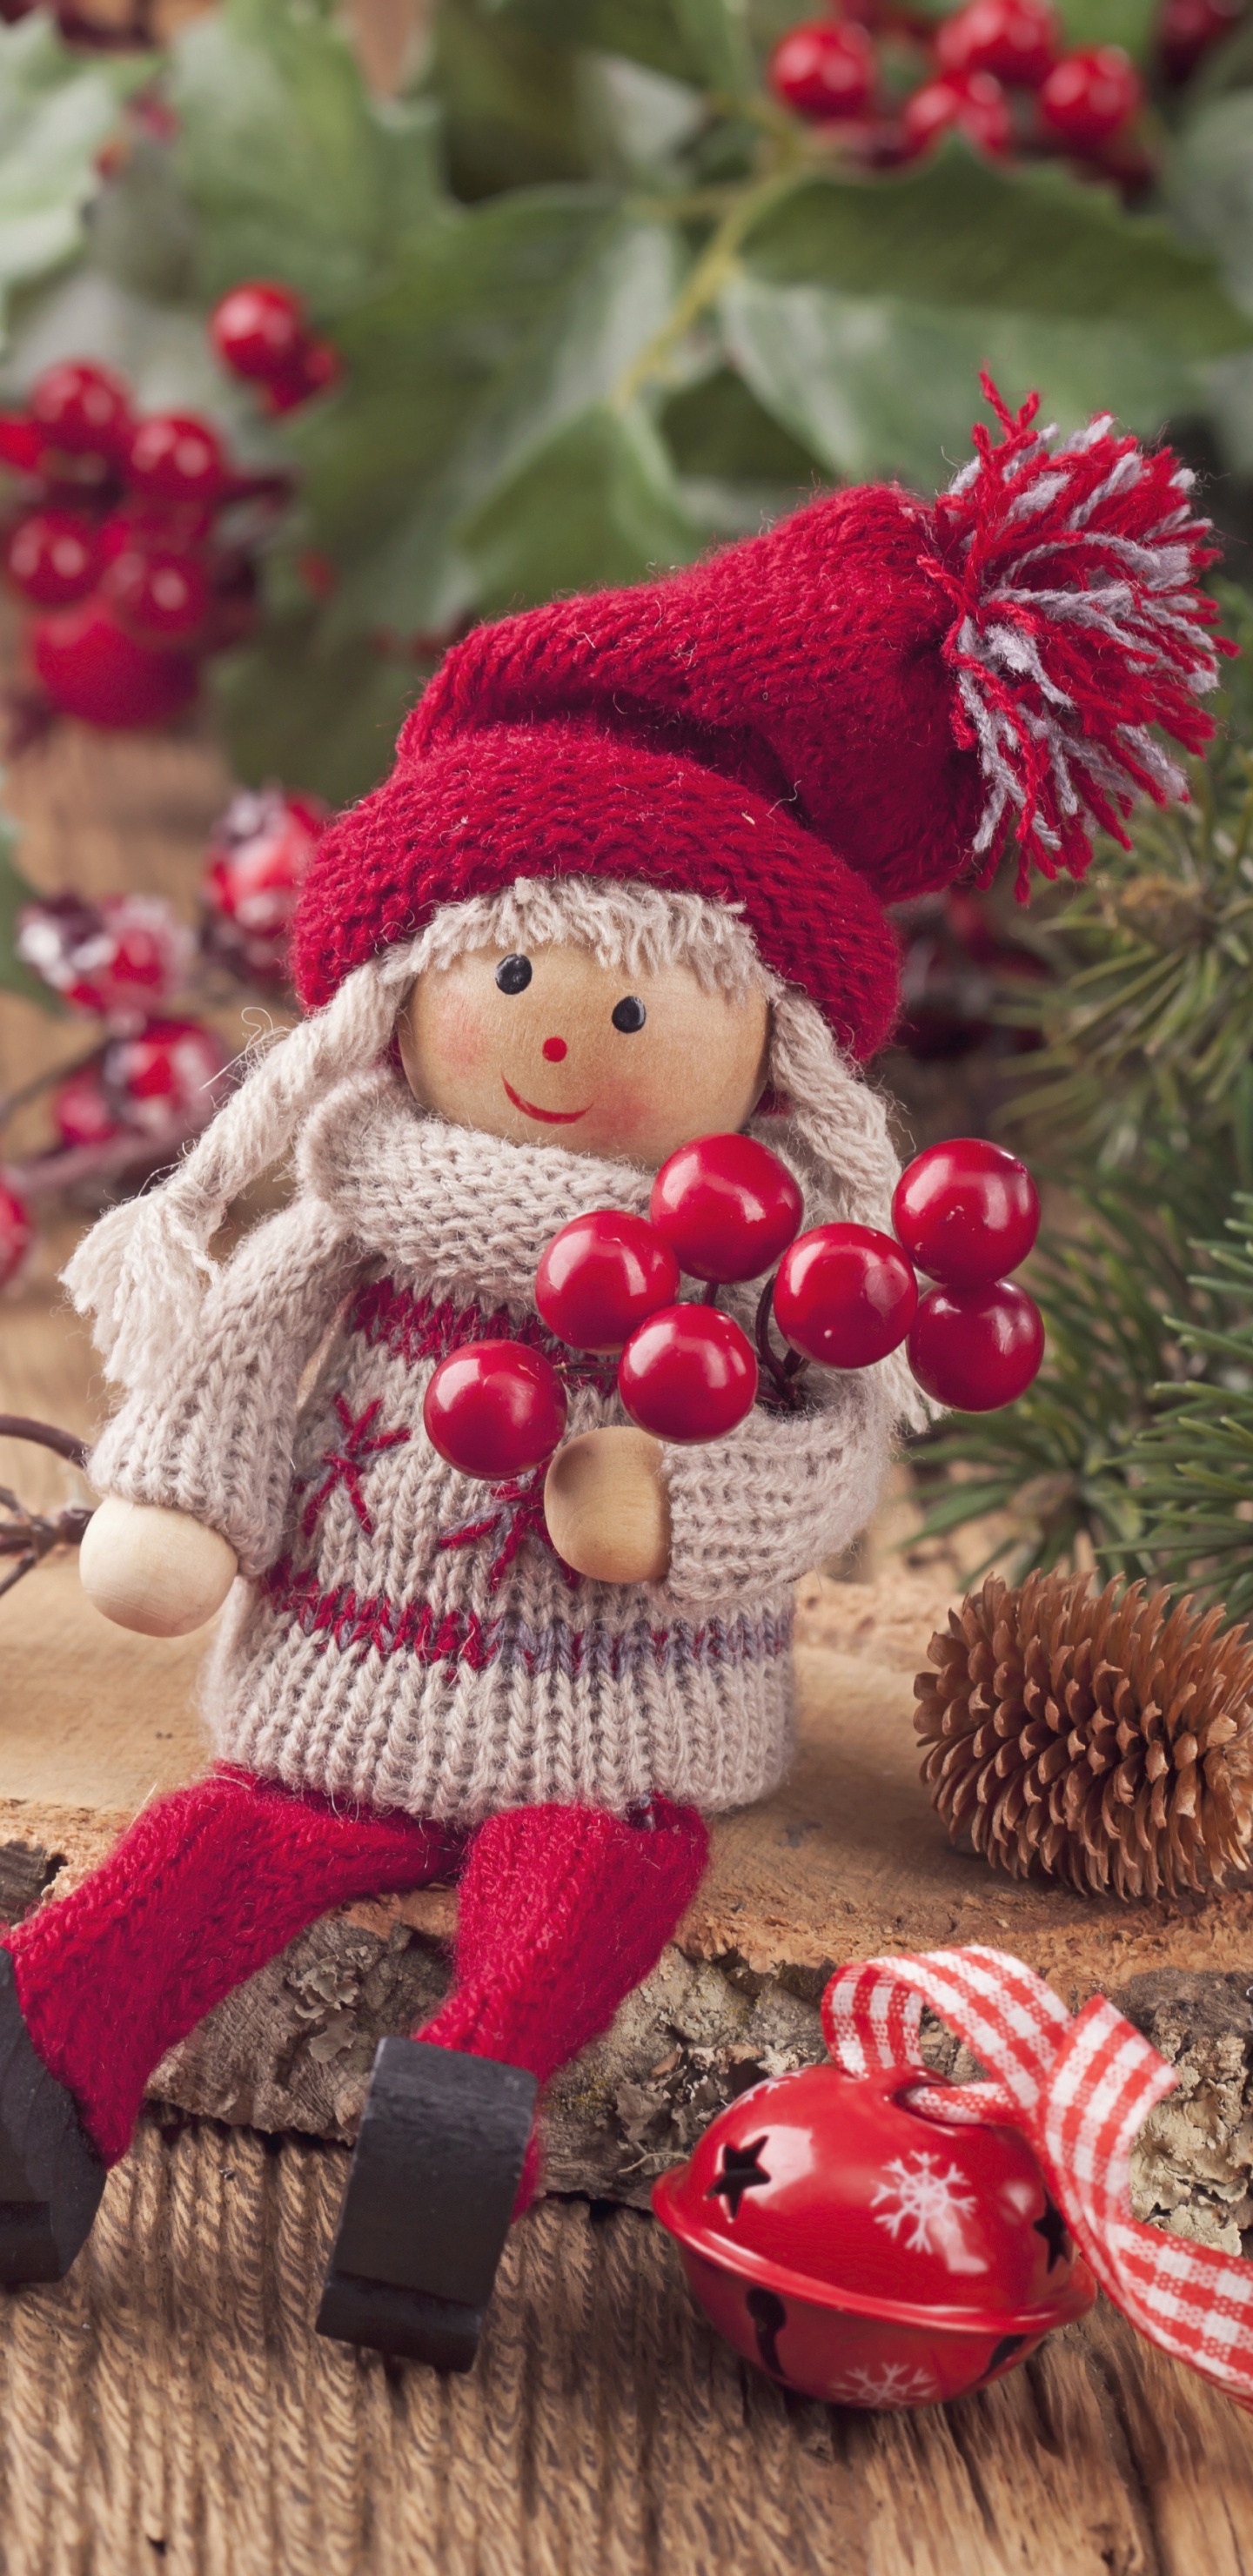 Christmas Day, Doll, Santa Claus, Christmas Ornament, Christmas Decoration. Wallpaper in 1440x2960 Resolution